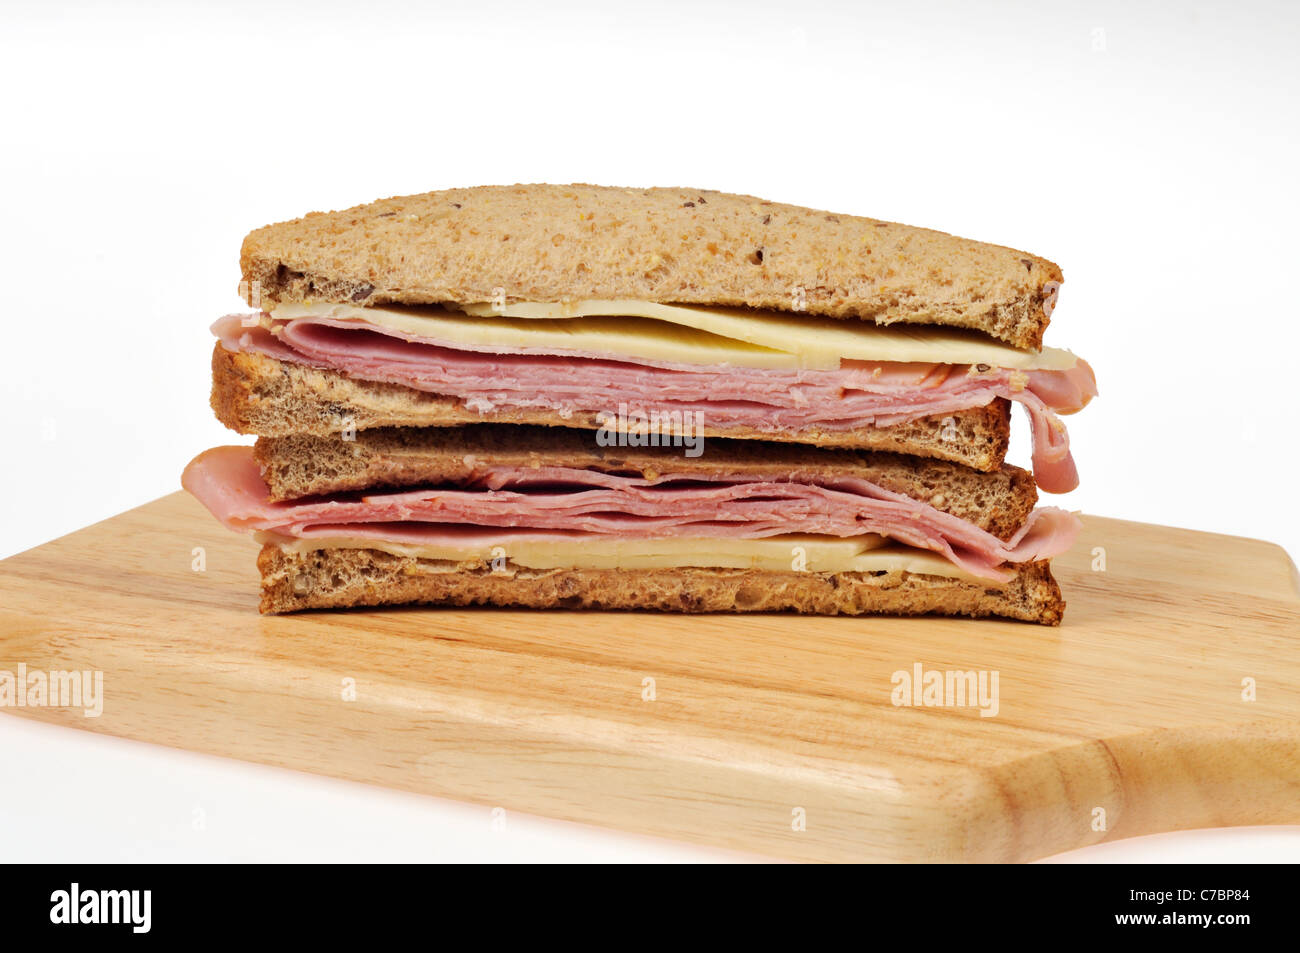 Ham and cheese sandwich on whole meal bread cut in half on wood cutting board on white background. Stock Photo